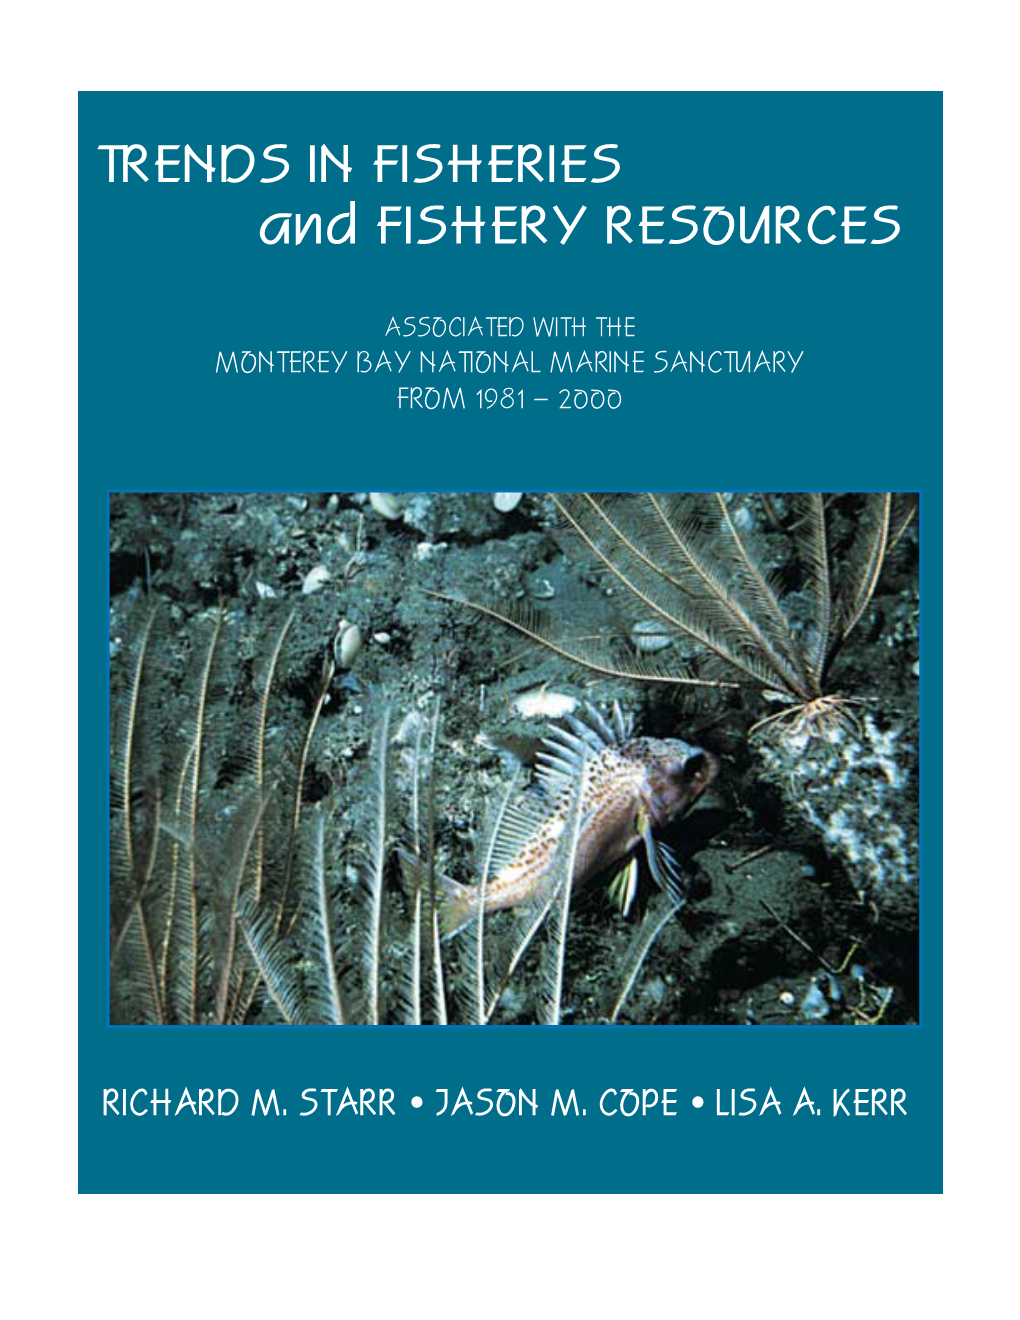 TRENDS in FISHERIES and FISHERY RESOURCES